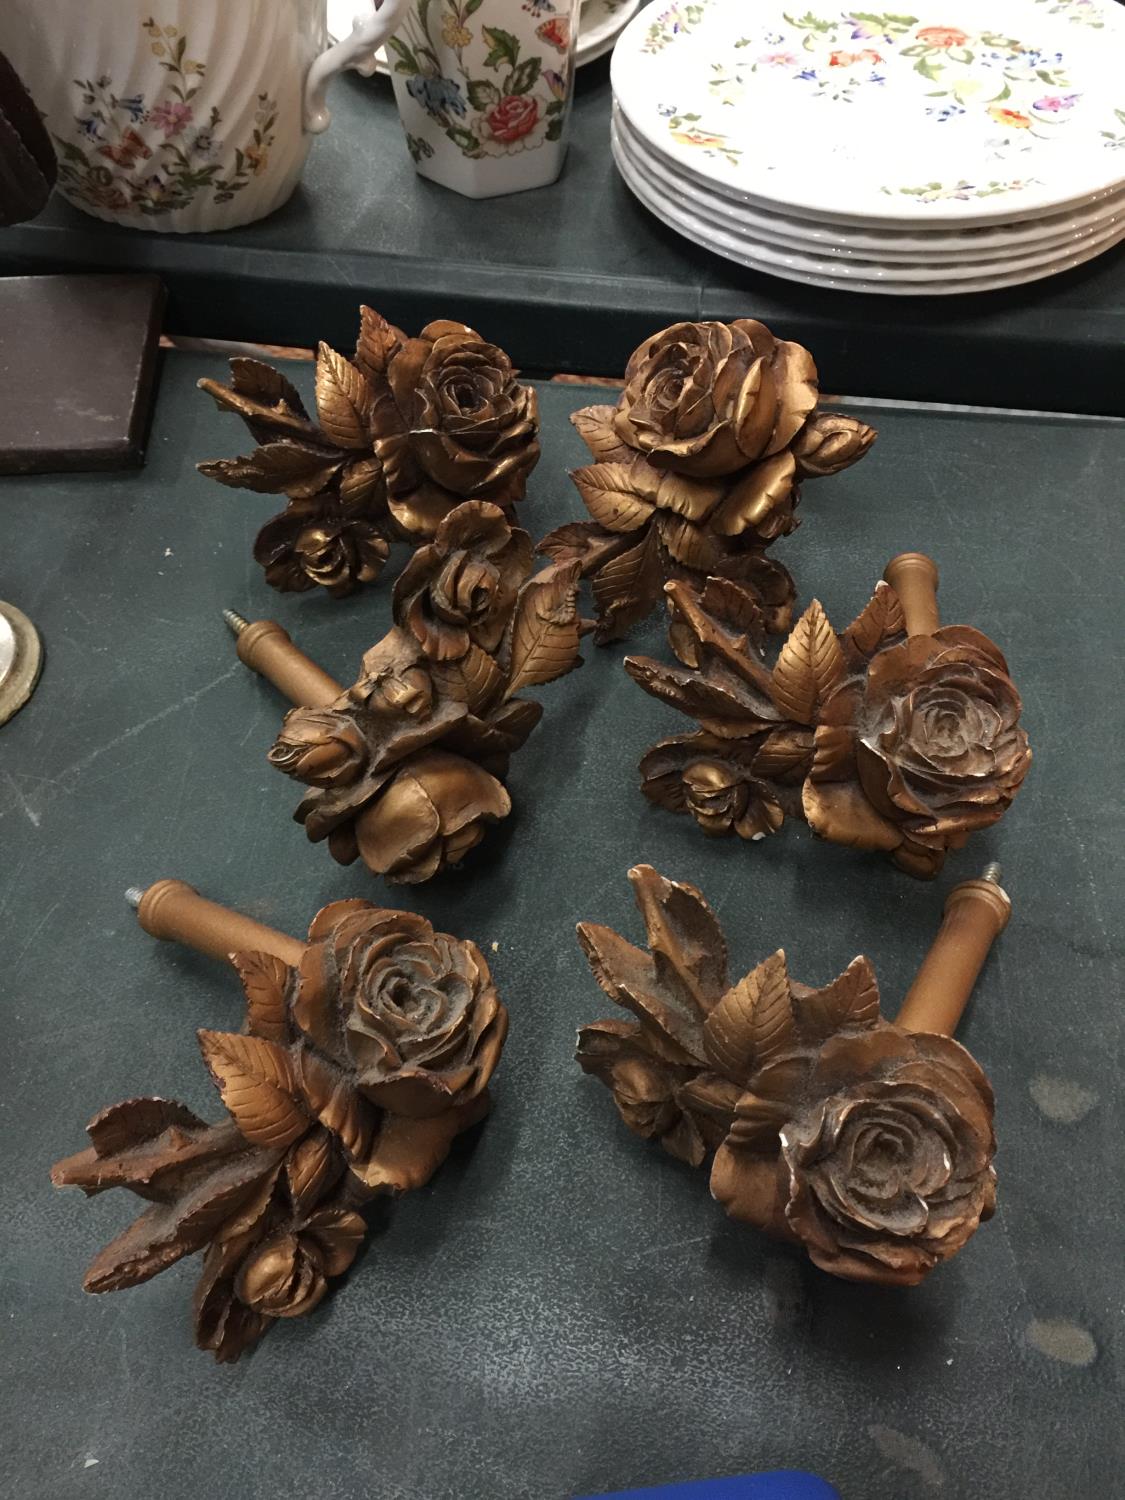 SIX CARVED WOODEN CURTAIN TIE BACKS IN THE SHAPE OF A ROSE